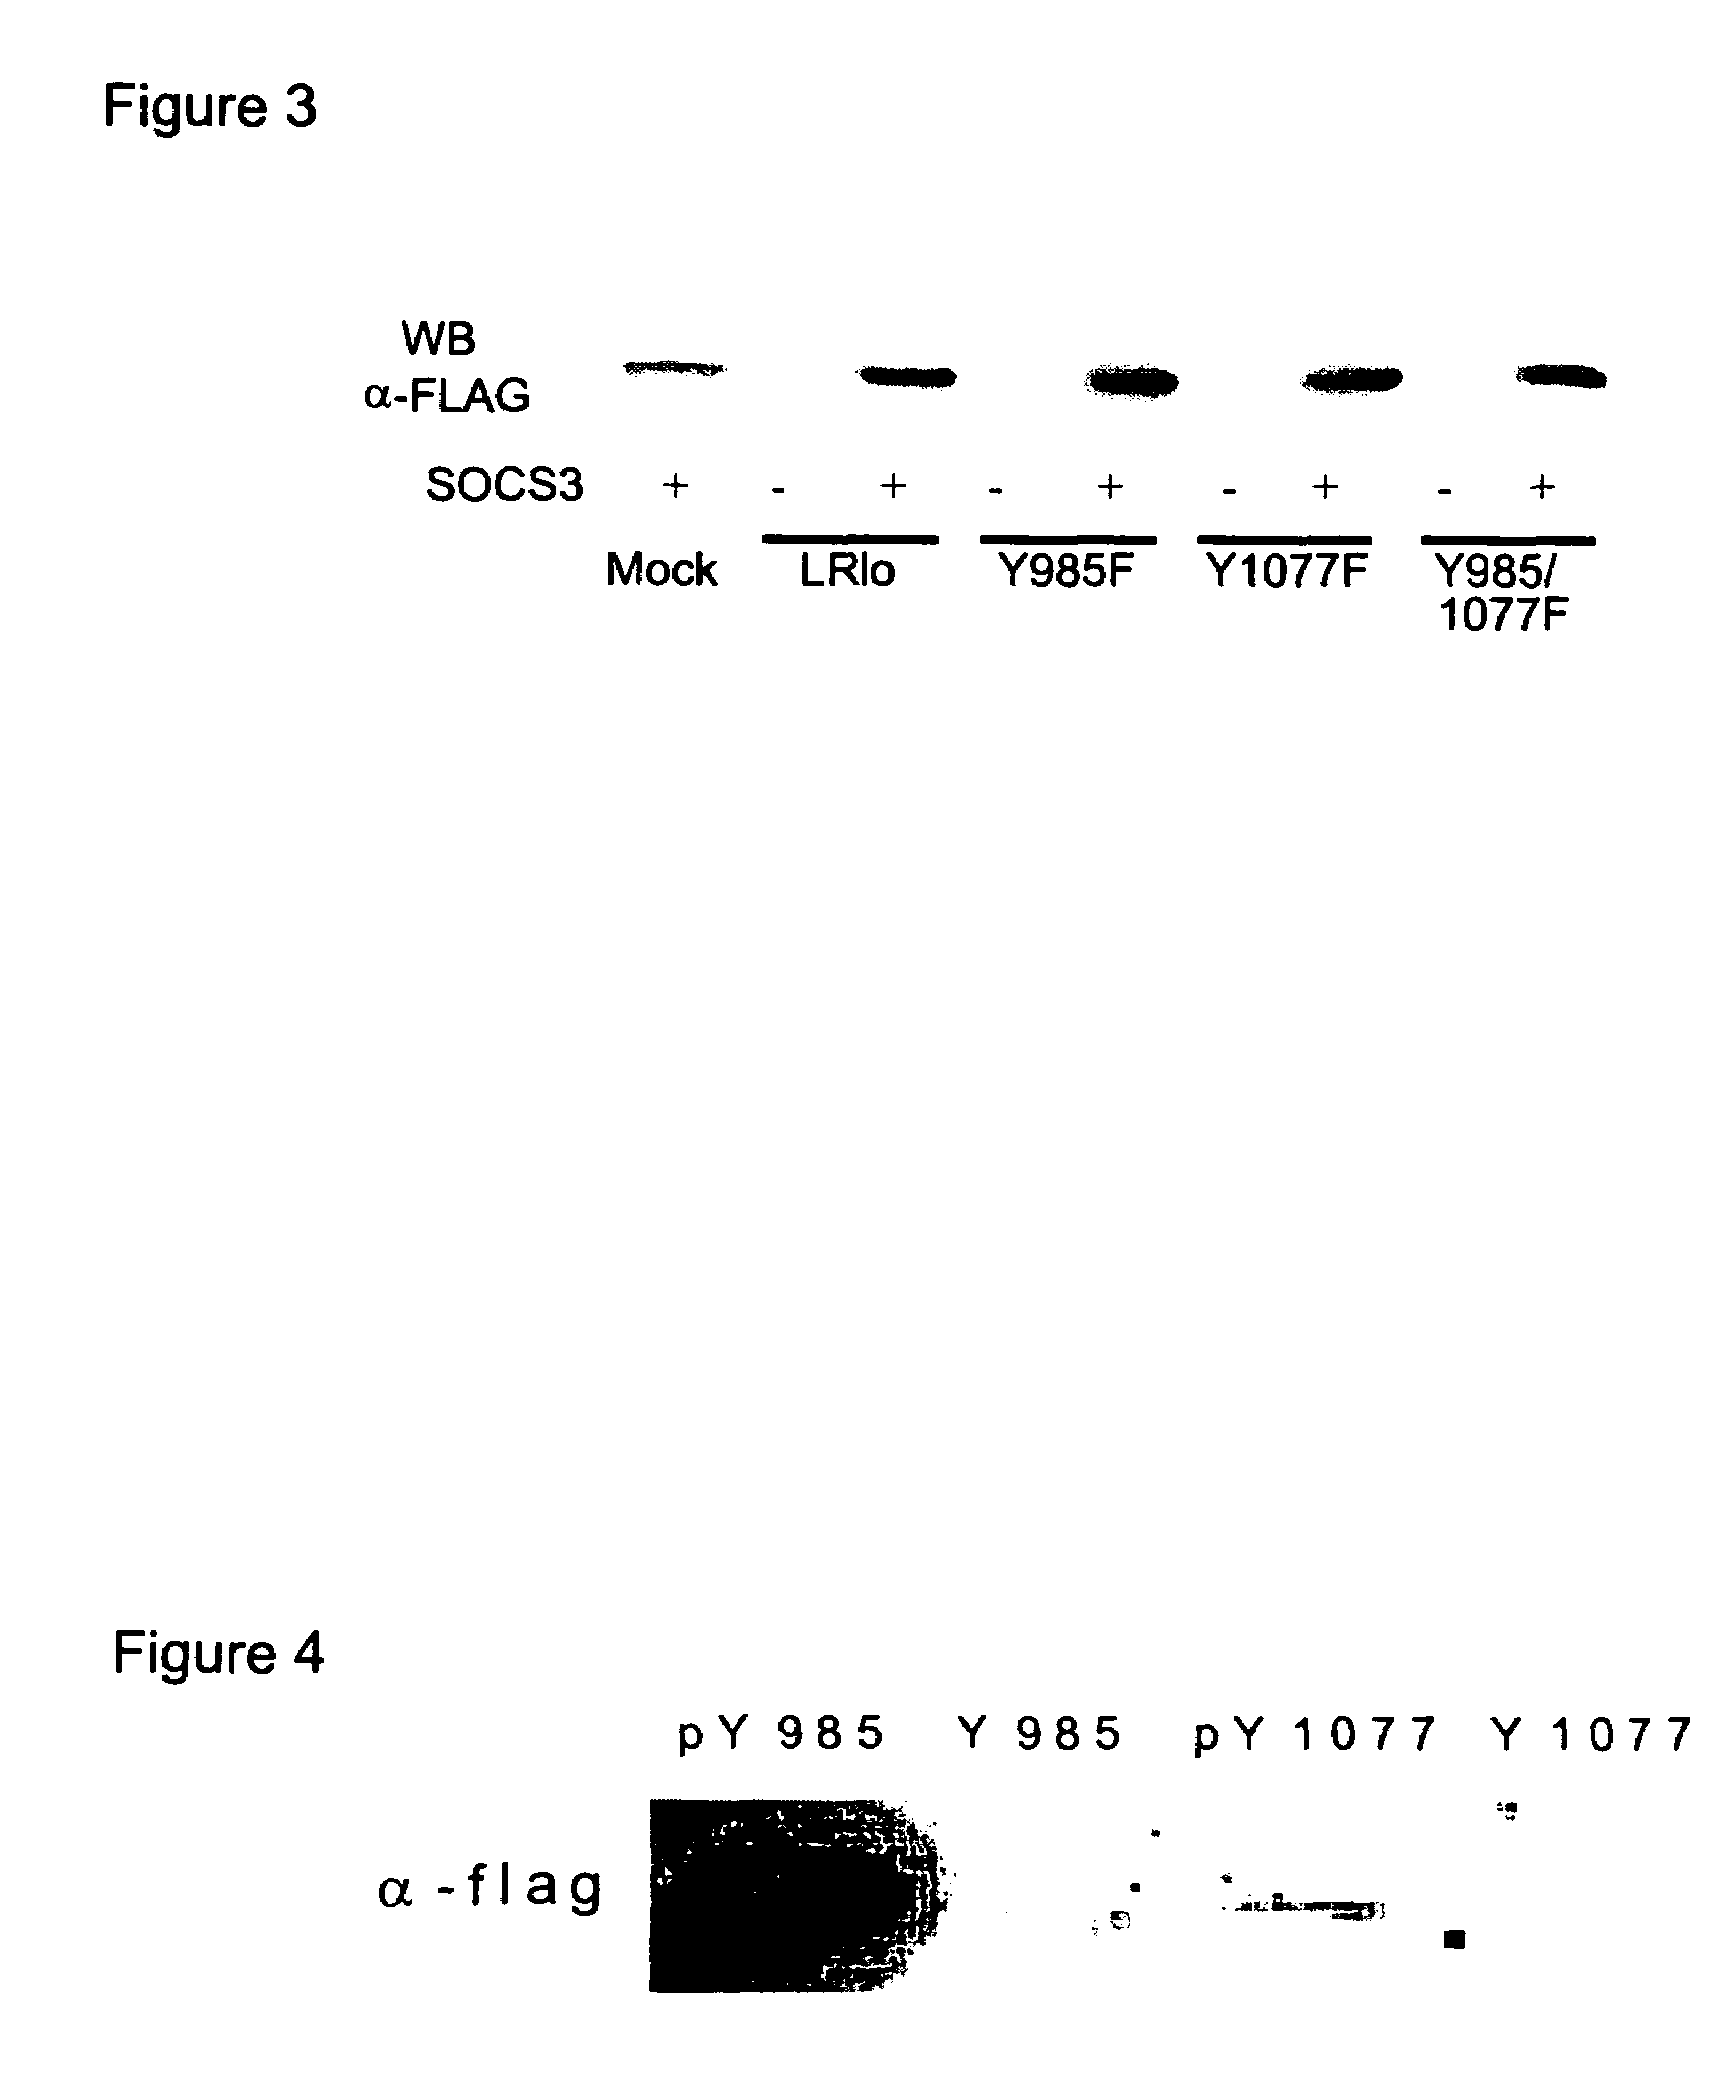 Functional fragment of the leptin receptor